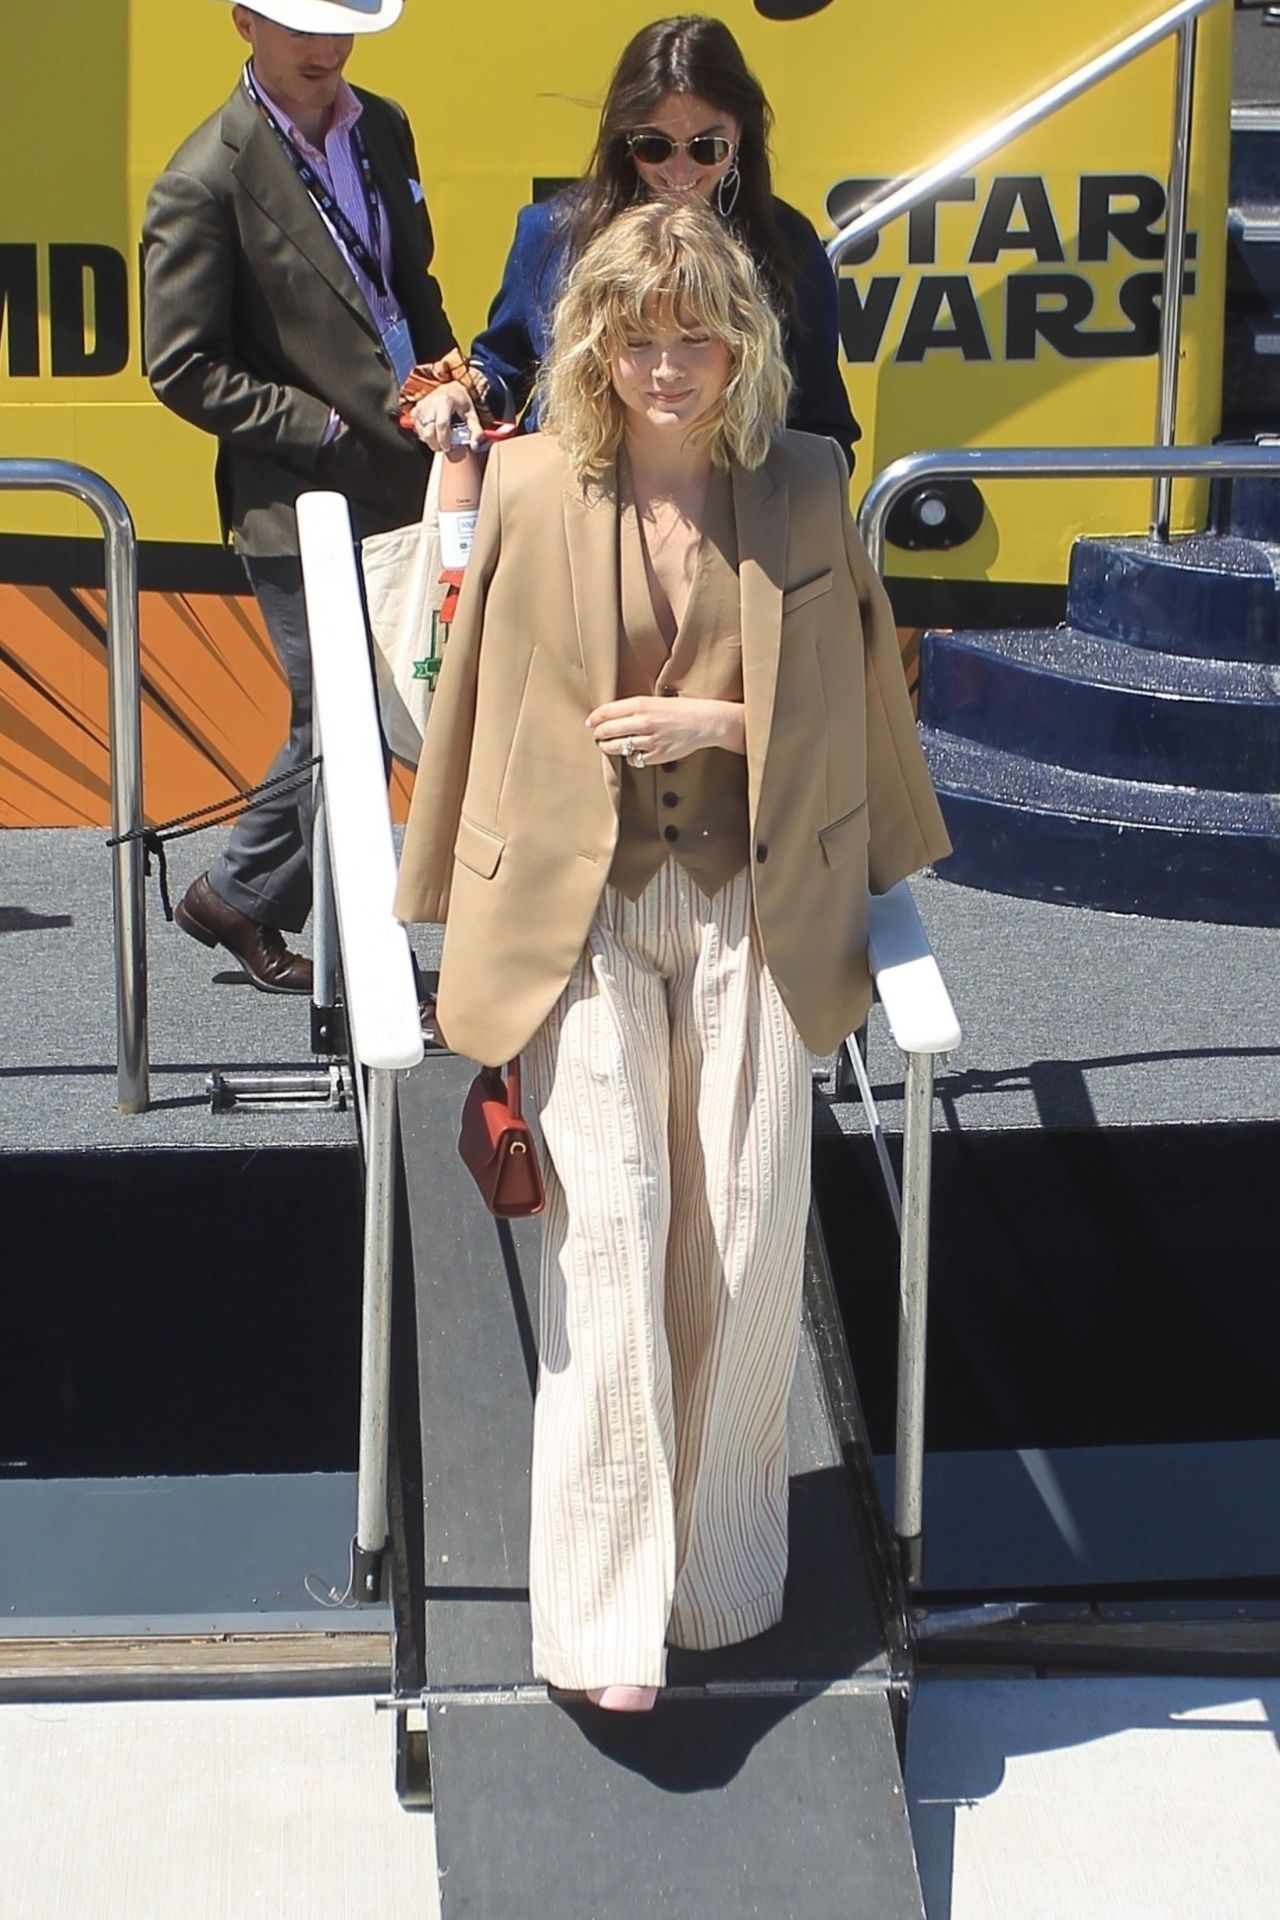 maddie-hasson-arrives-at-sdcc-2019-6.jpg